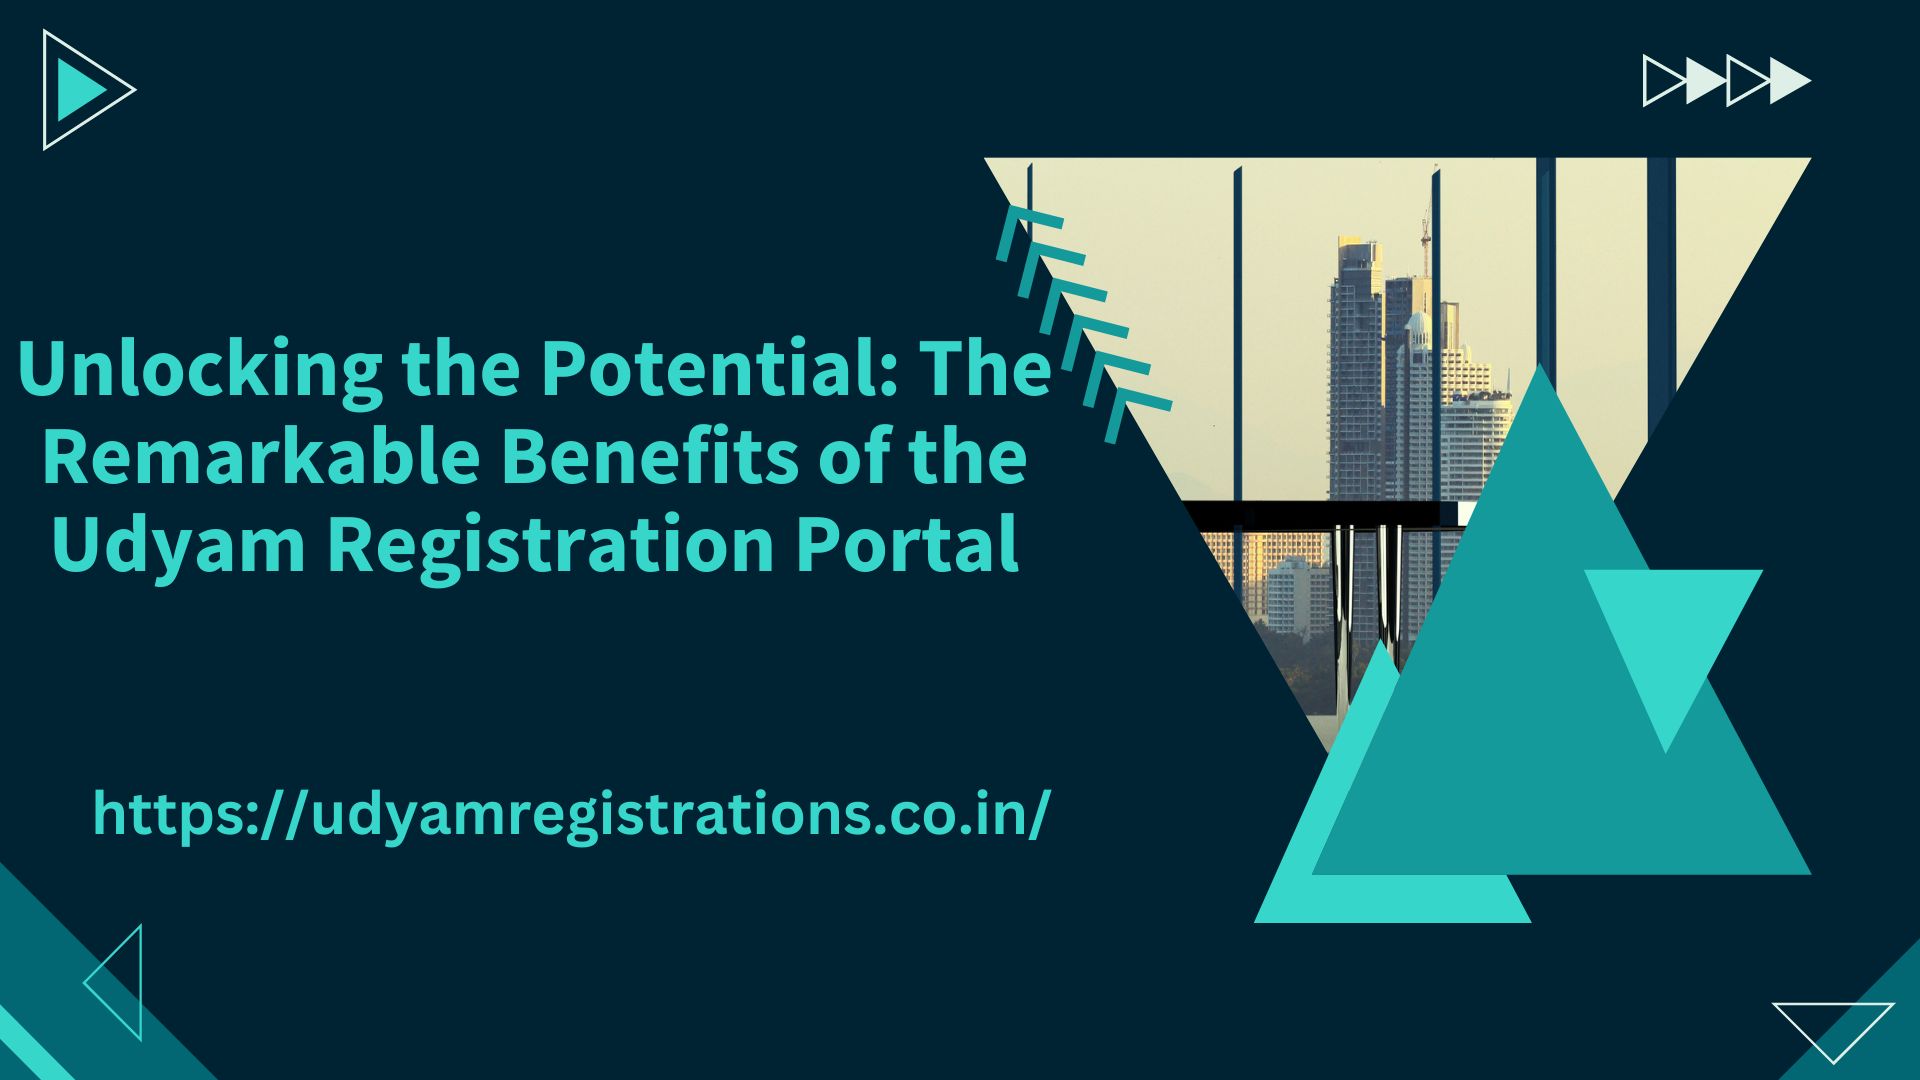 Unlocking the Potential: The Remarkable Benefits of the Udyam Registration Portal